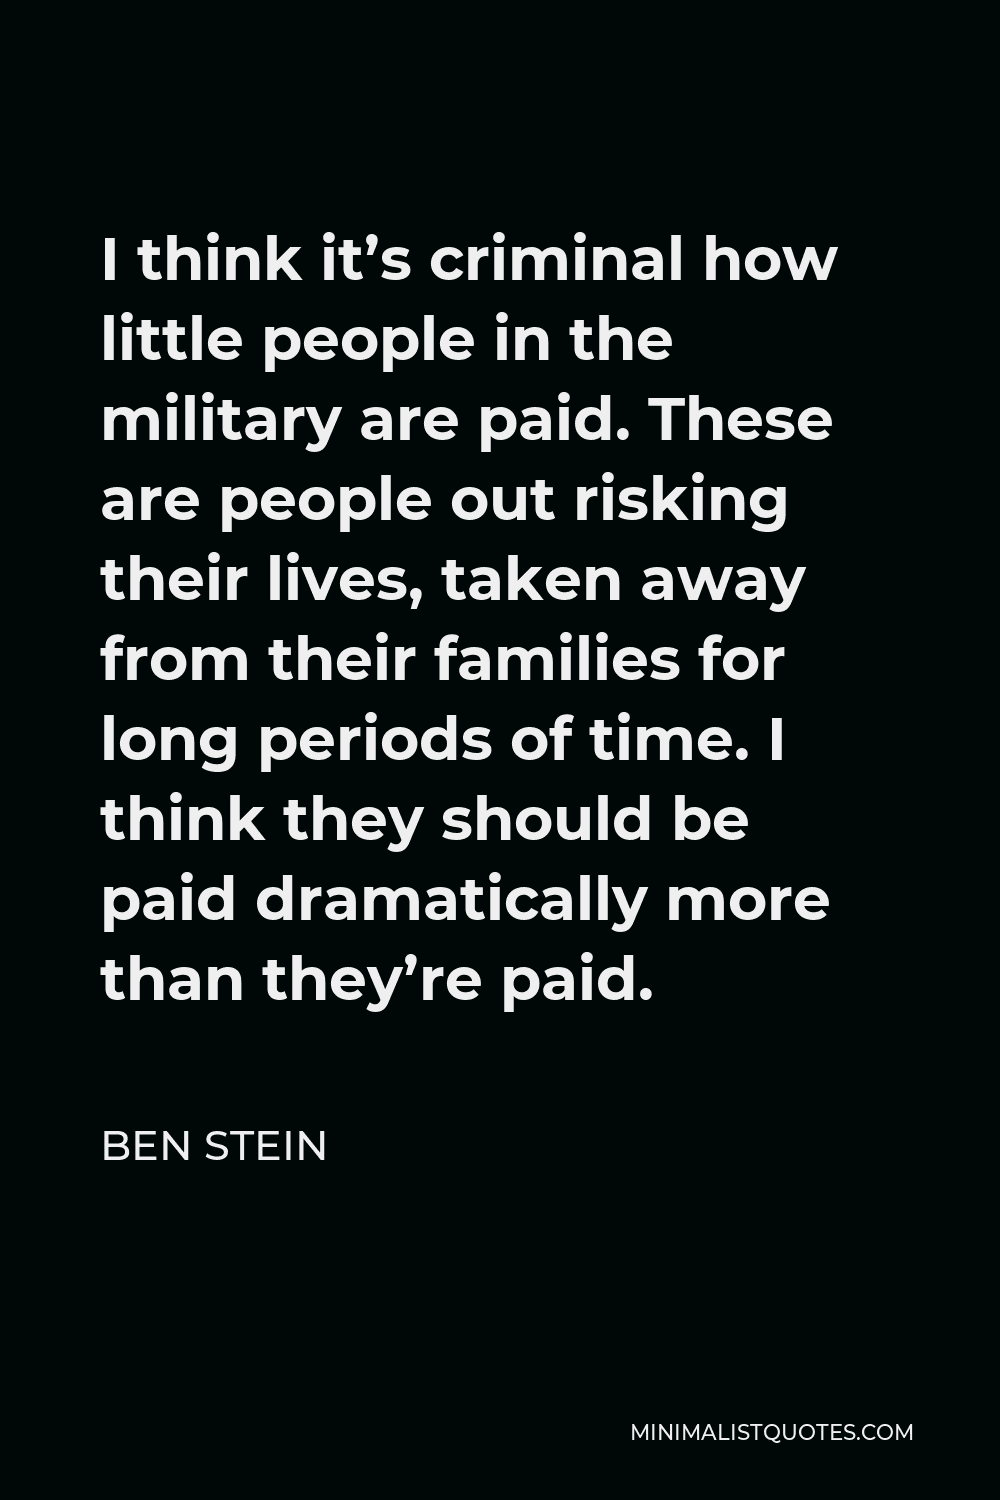 Ben Stein Quote - I think it’s criminal how little people in the military are paid. These are people out risking their lives, taken away from their families for long periods of time. I think they should be paid dramatically more than they’re paid.